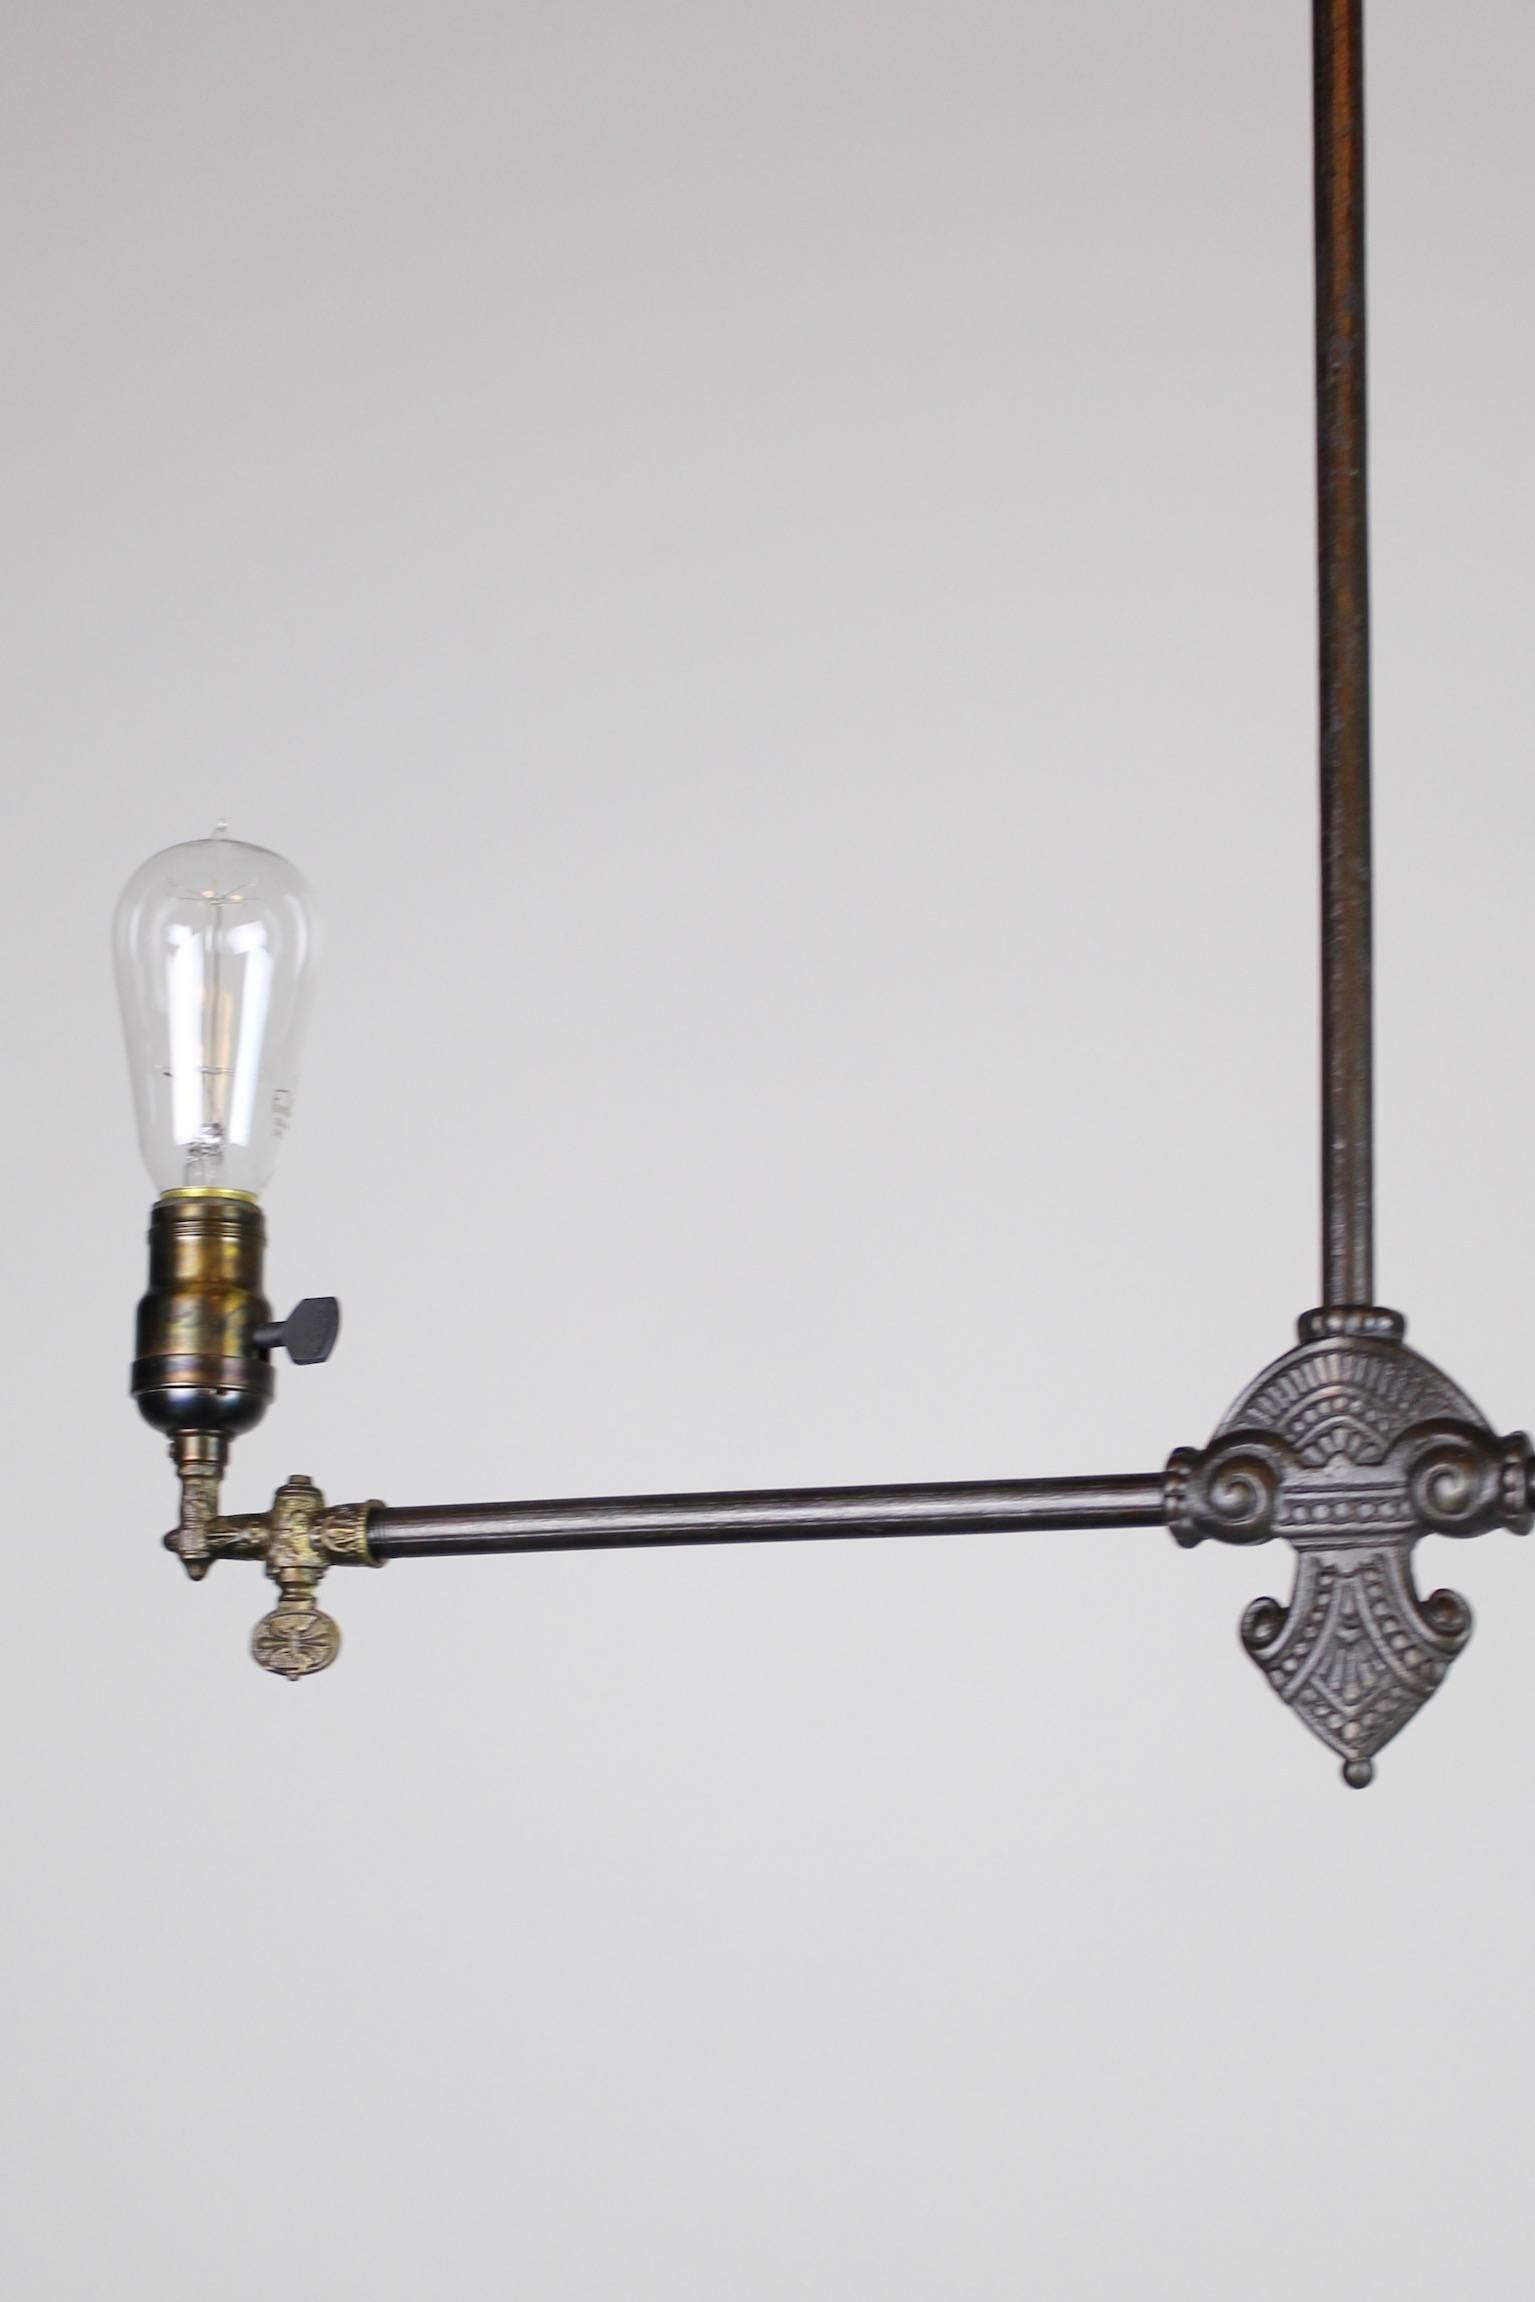 Late 19th Century Original Industrial Gas Light Fixture, circa 1885 by Archer & Pancoast For Sale